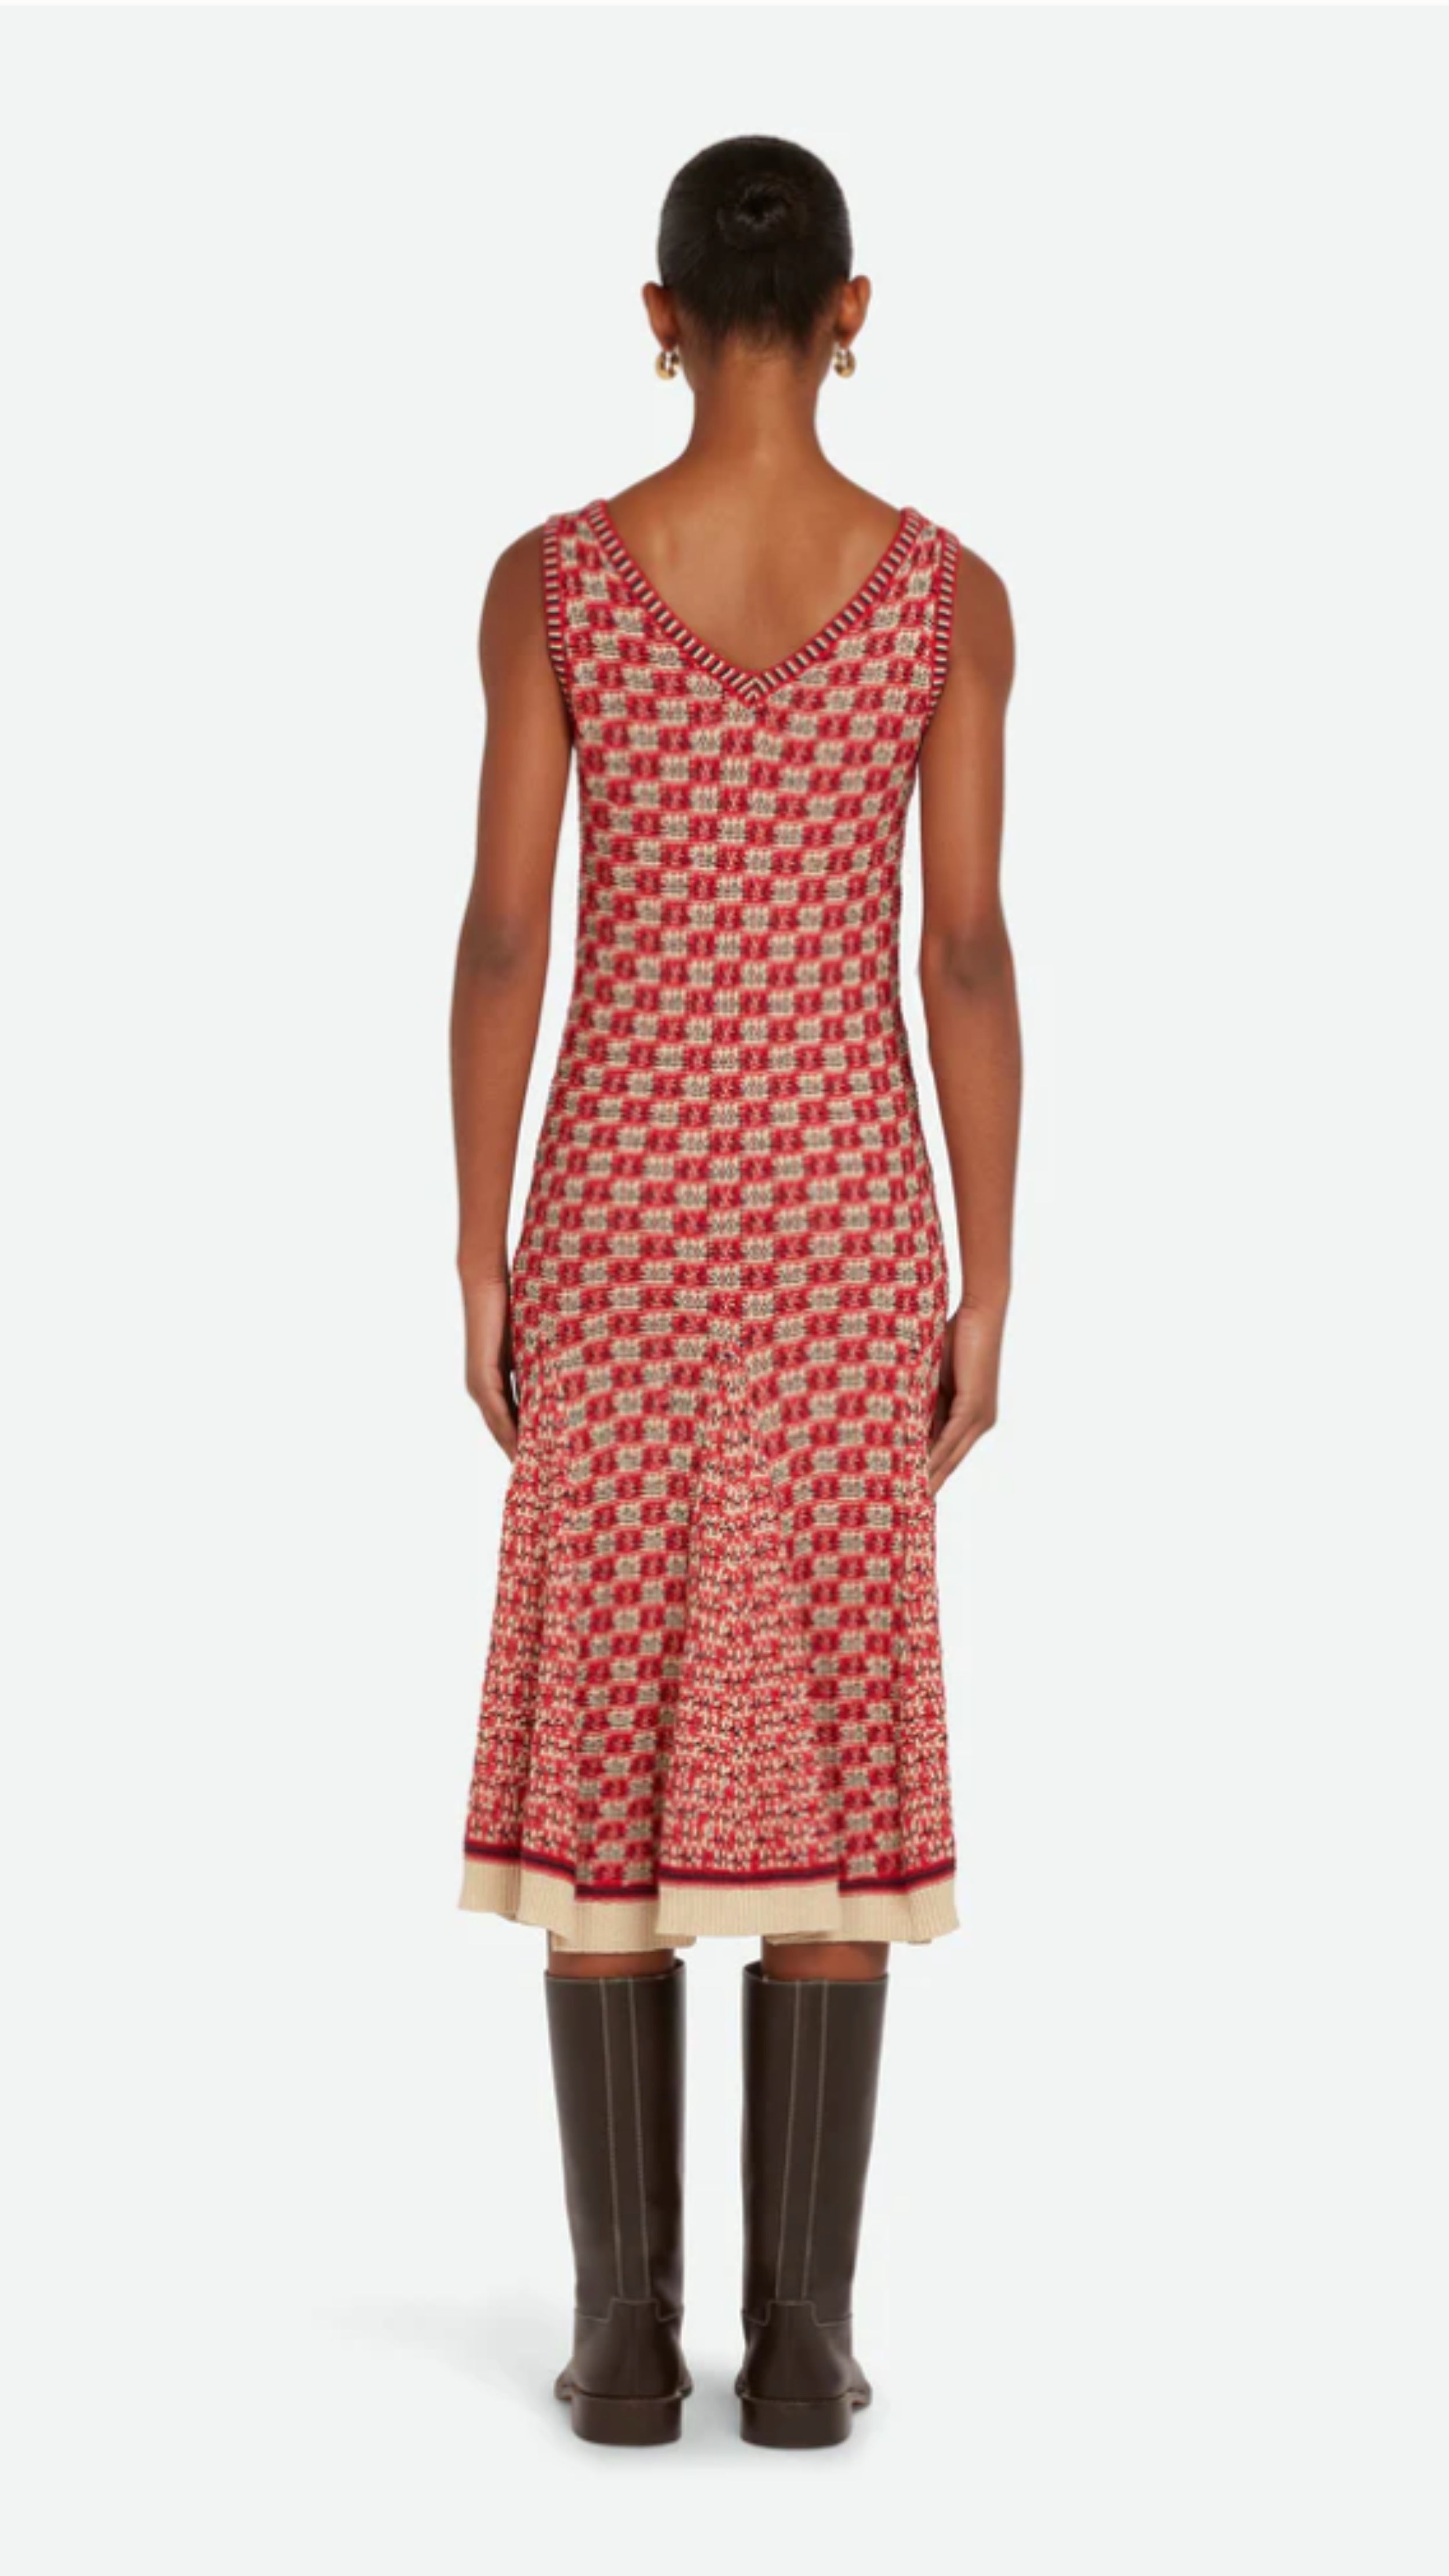 Wales Bonner Soar Godet Dress Woven in an light weight summer Italian cotton knit. This midi length dress has a checkered pattern in red, ivory and black. It has a v-neckline and slightly flared skirt that falls just below the knee. Shown on model facing back.